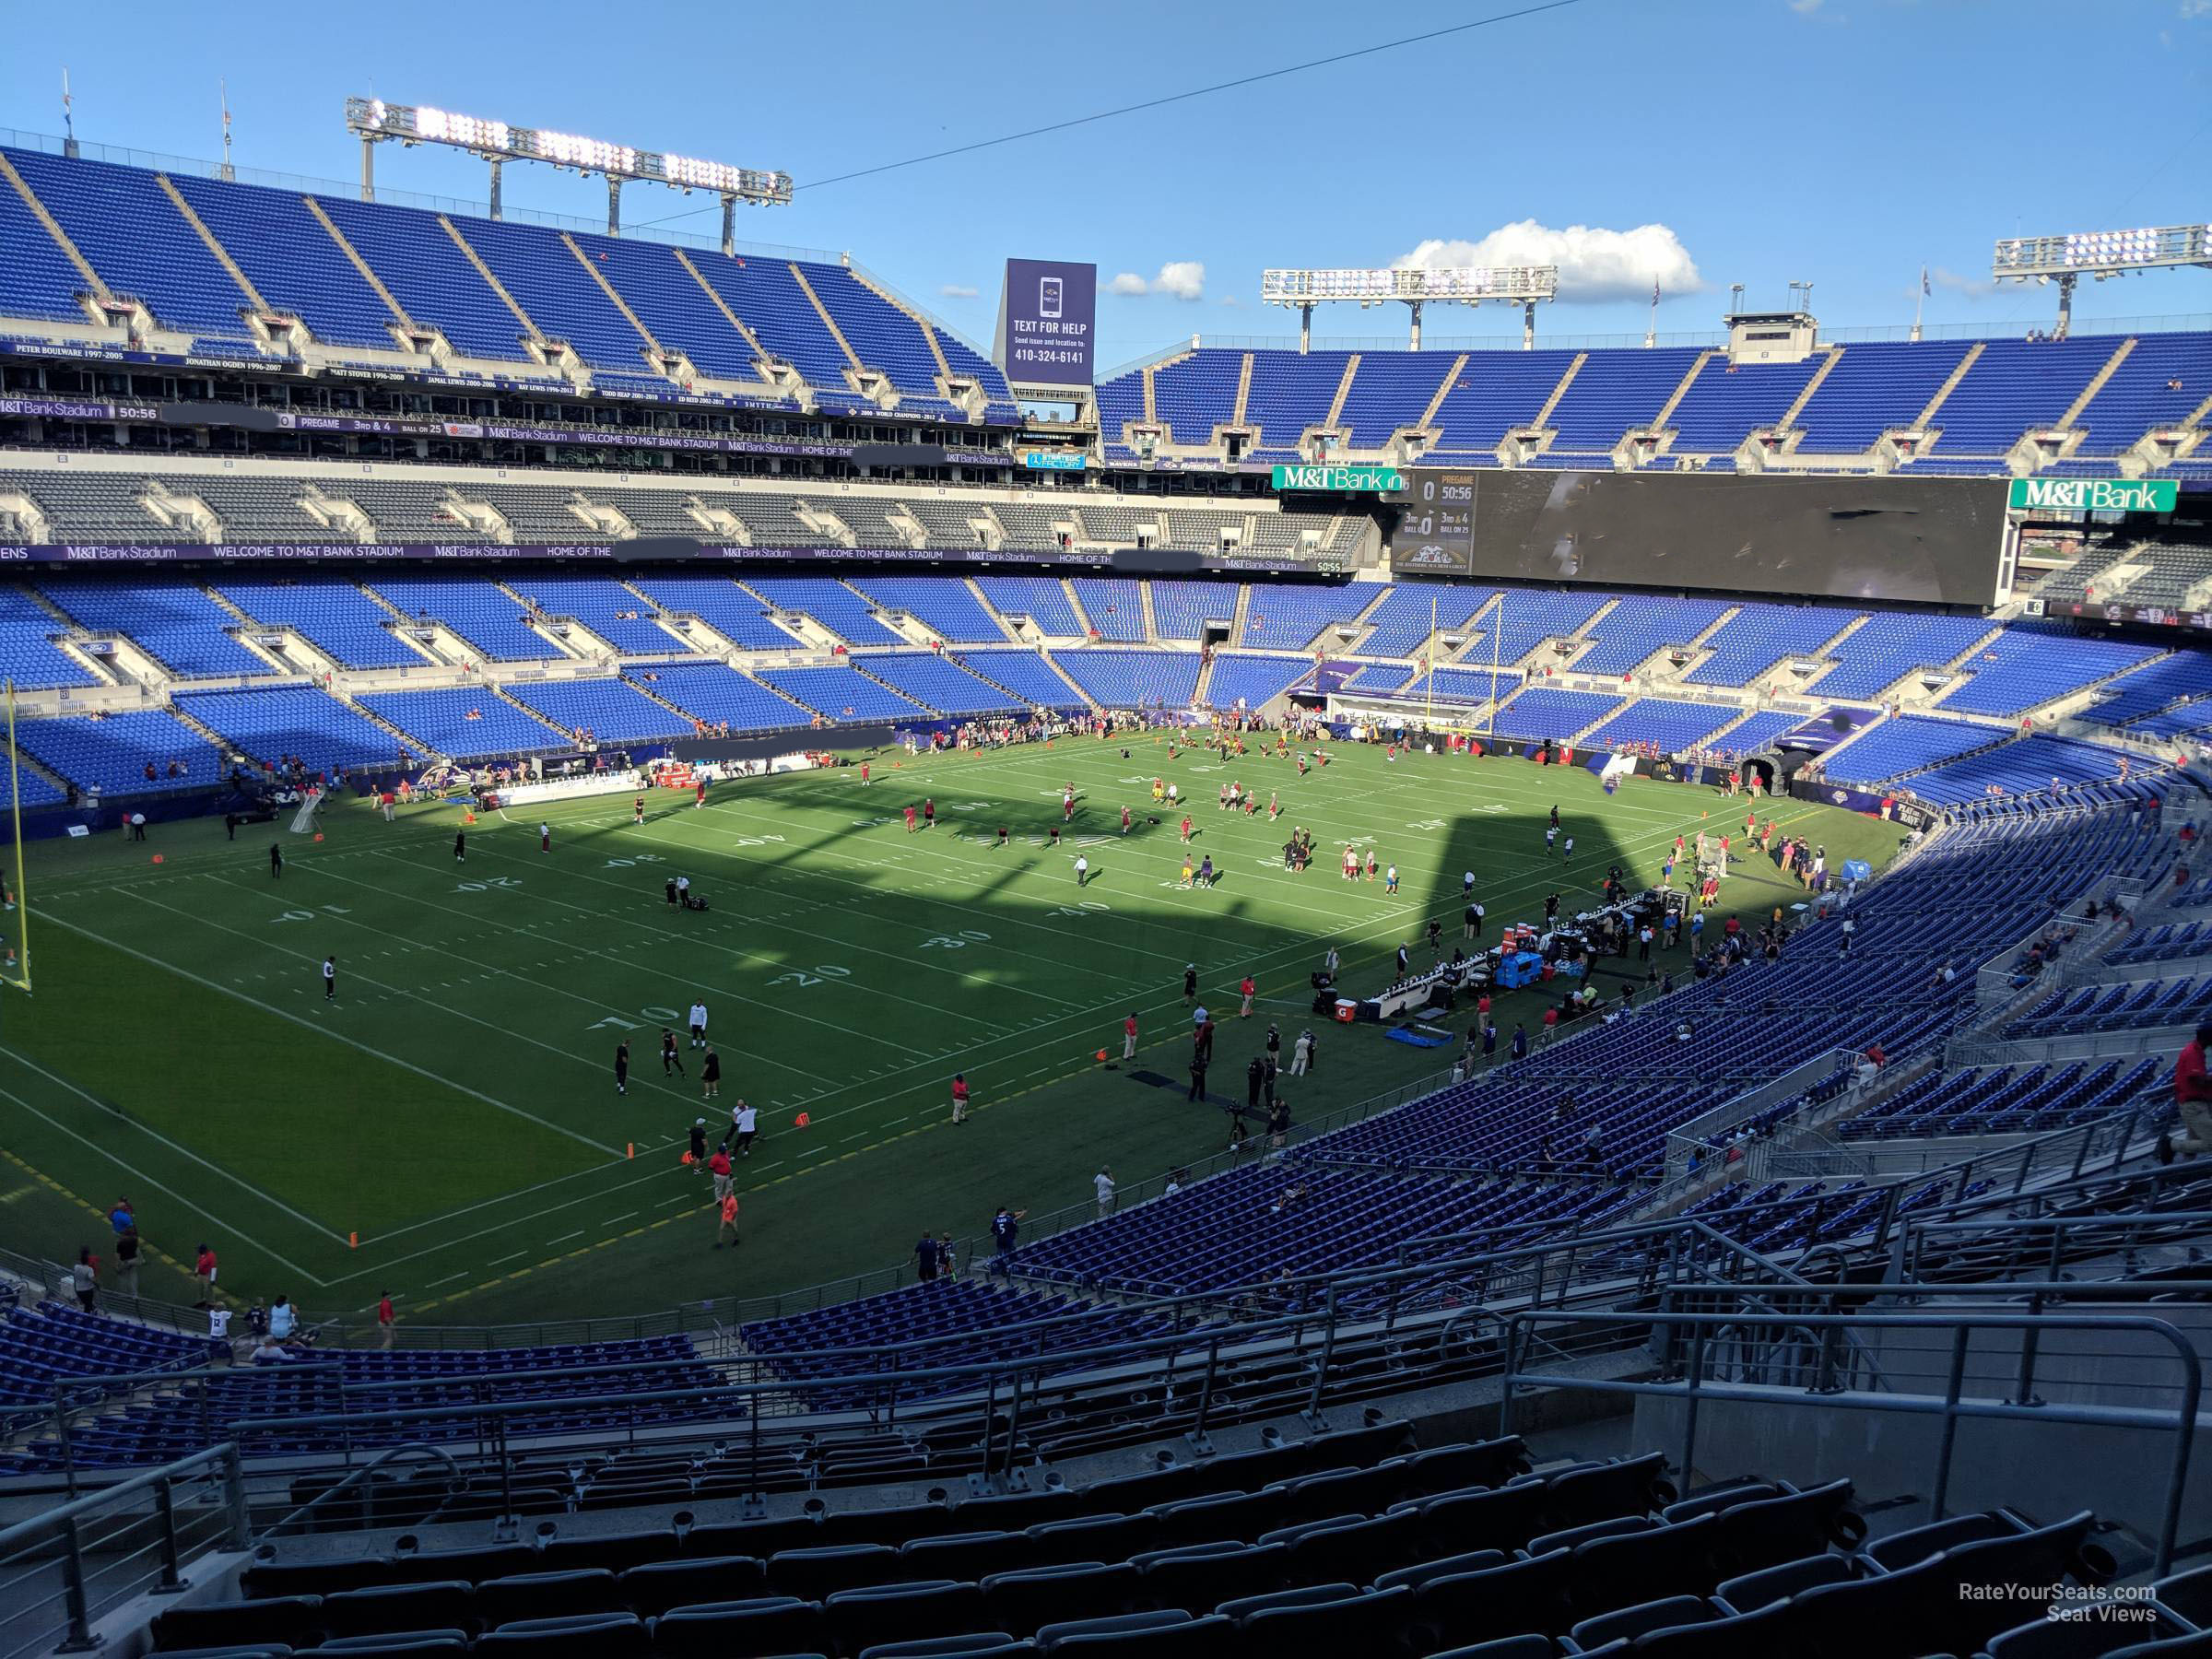 Section 233 at M&T Bank Stadium